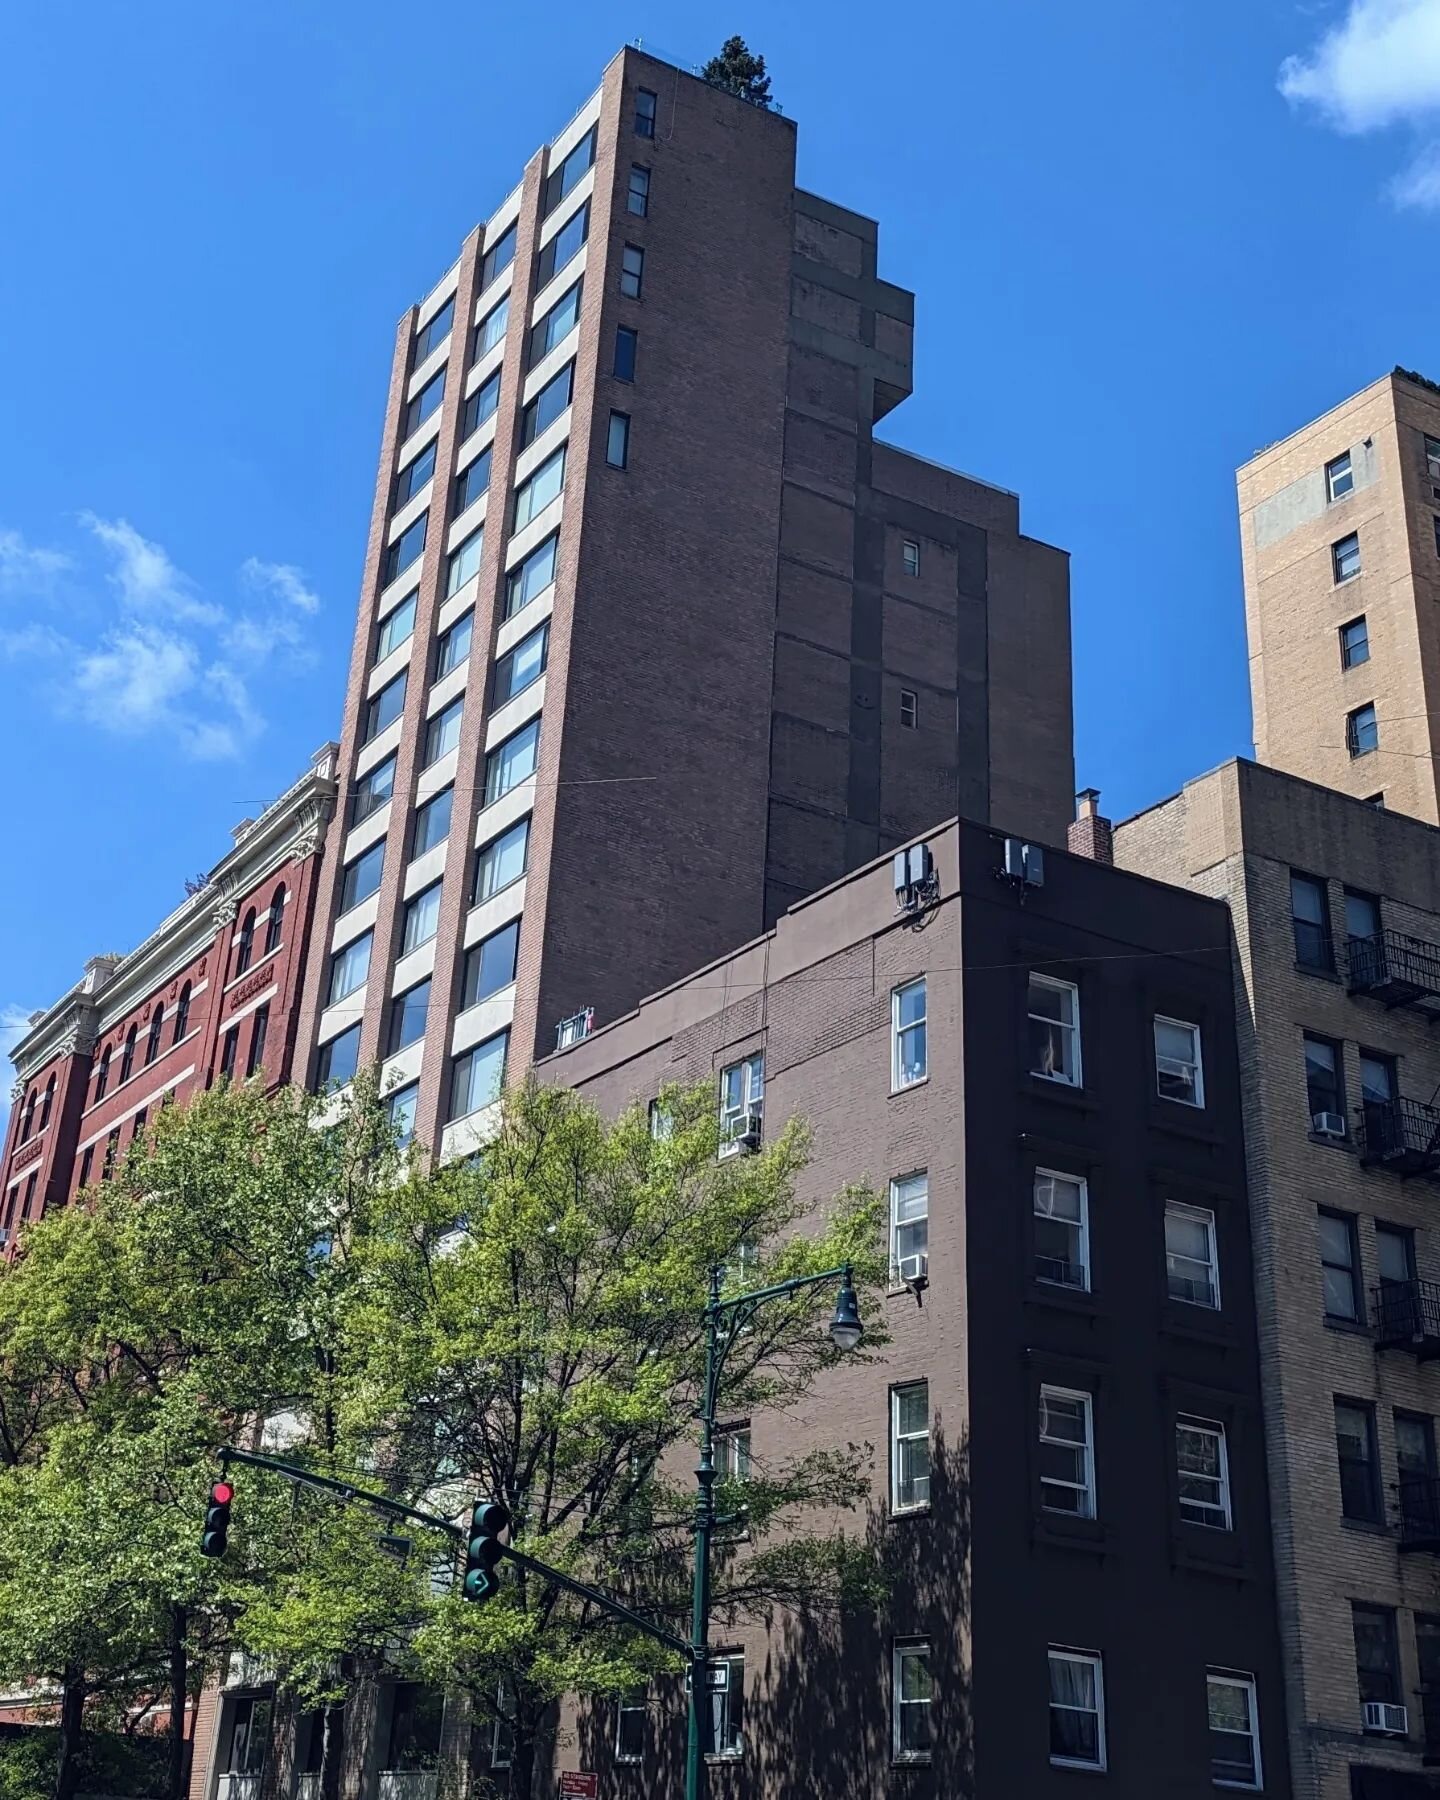 We have had a massive influx of clients that have concrete ceilings and floors and are able to hear their upstairs neighbor. Our client on the UWS wanted us to soundproof their walls and ceiling for their baby that is on the way. 

#newyorkcity 
#new